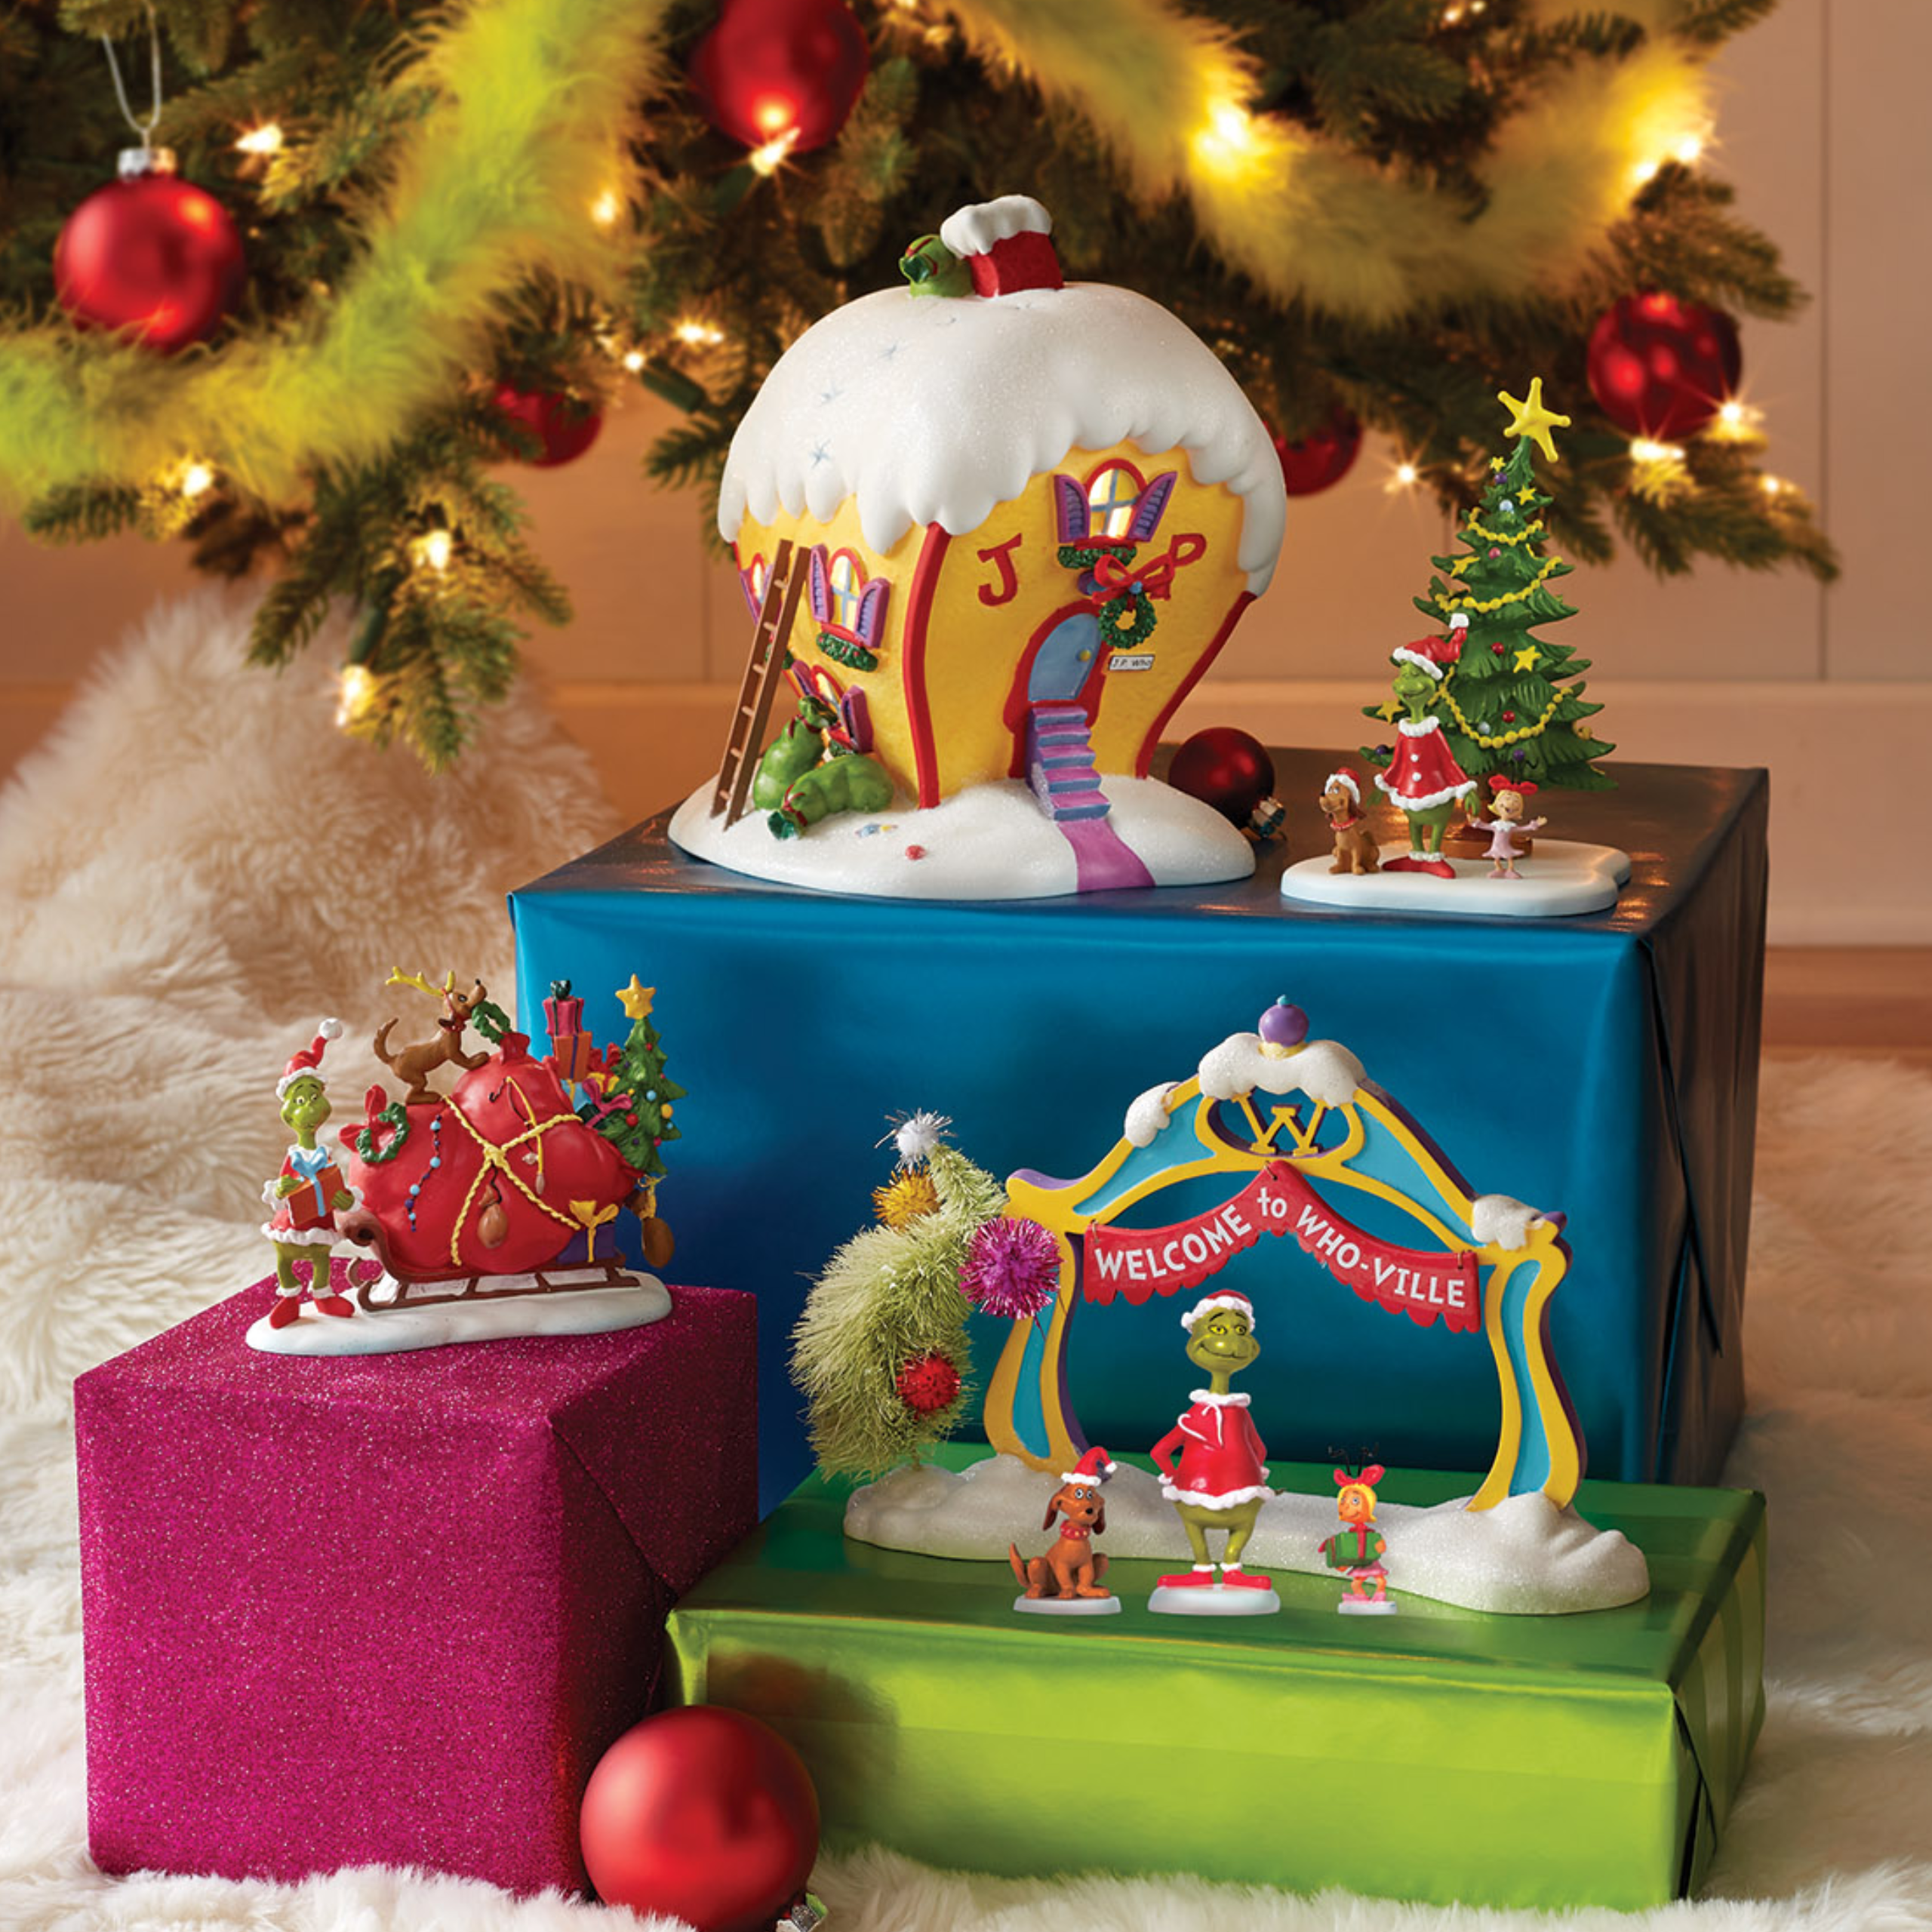 Department 56 - Grinch Village - Grinch, Max & Cindy-Lou Who